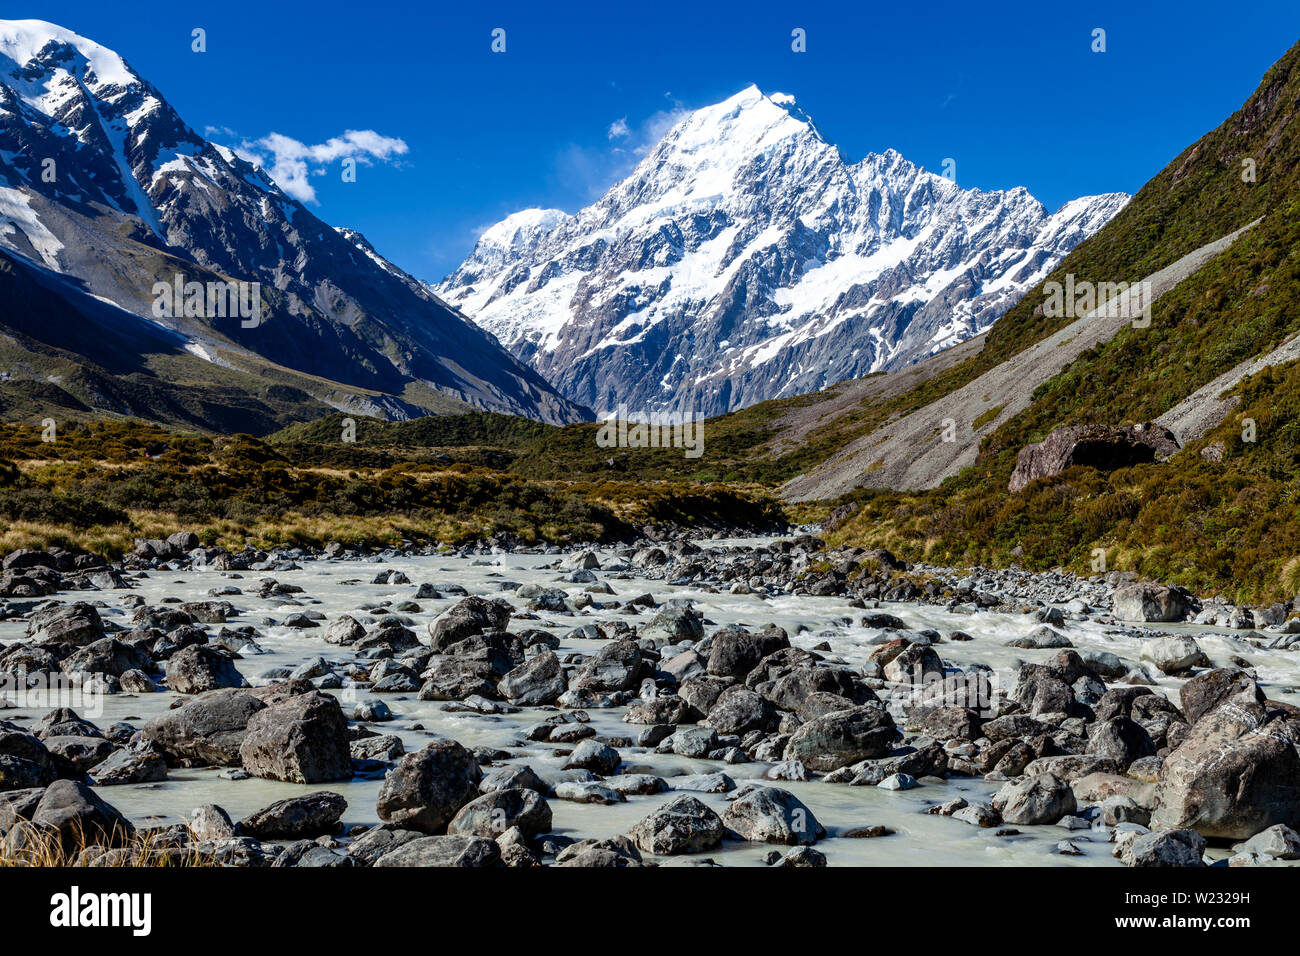 A View Of Mount Cook From The Hooker Valley Track, Aoraki/Mt Cook National Park, South Island, New Zealand Stock Photo